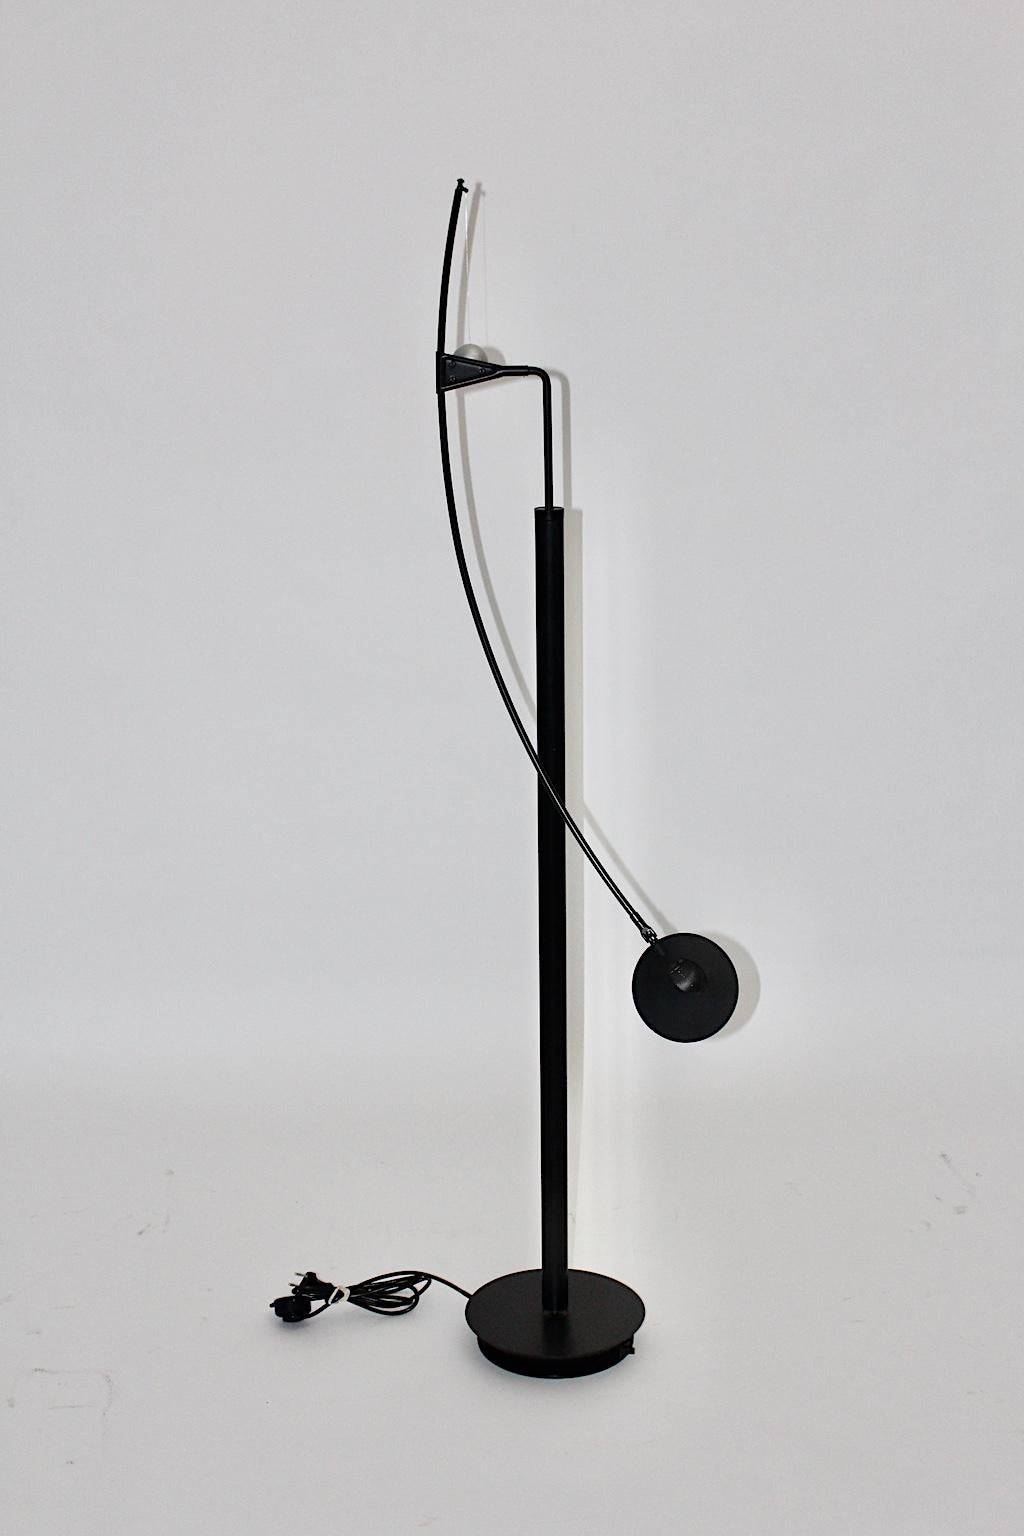 Postmodern Vintage Black Floor Lamp by Carlo Forcolini 1989 for Artemide Italy For Sale 1